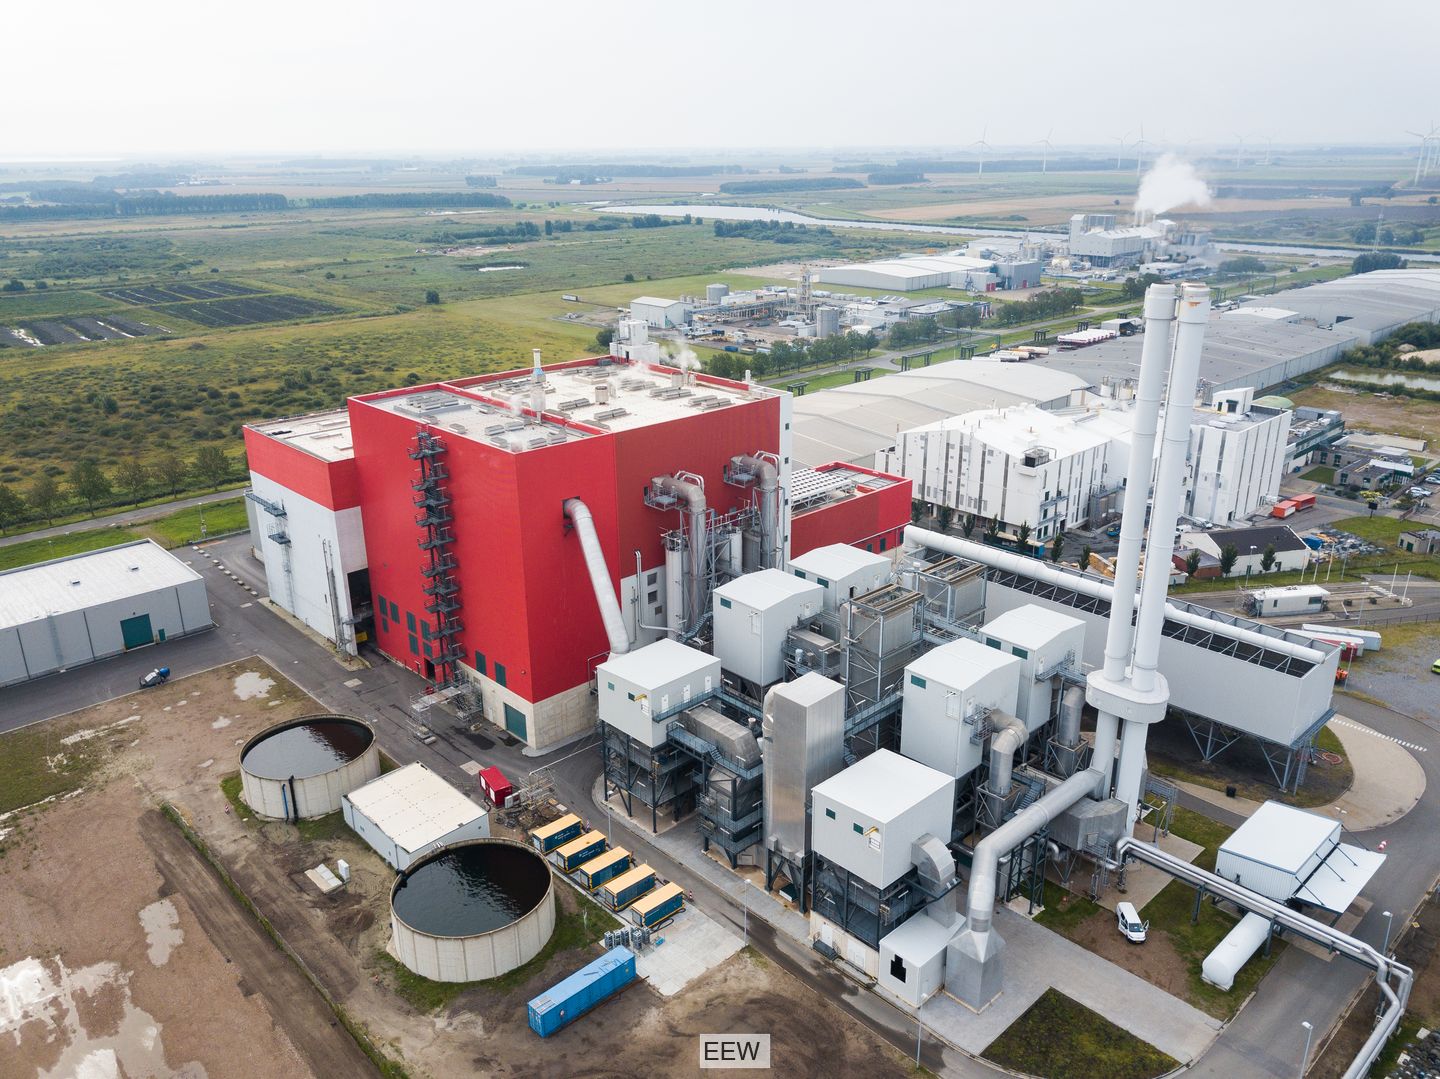 Areal view of EEW's waste to energy plant in Delfzijl, the Netherlands